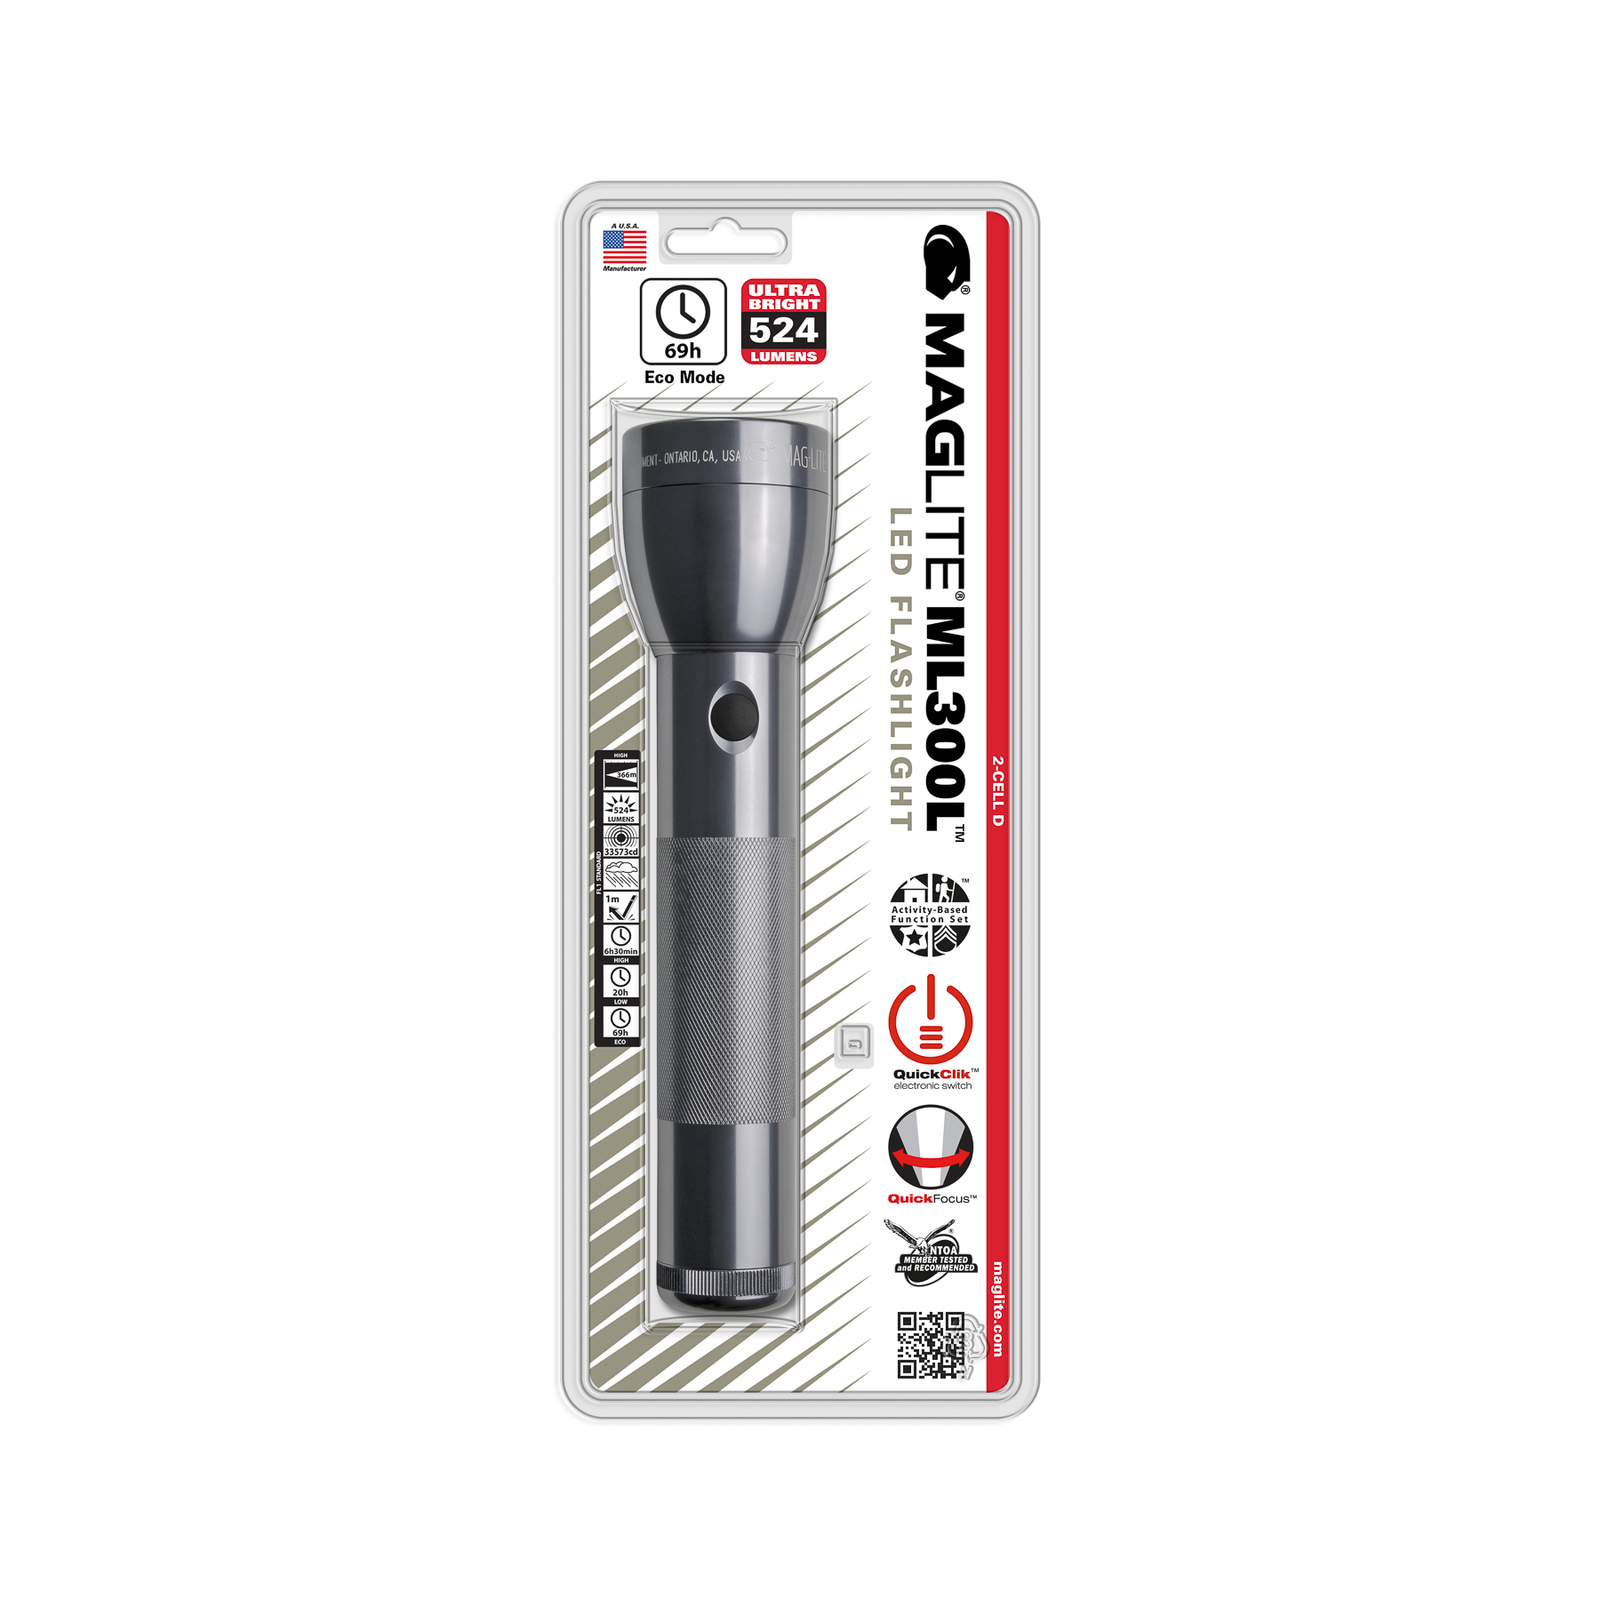 Maglite LED torch ML300L, 2-Cell D, grey